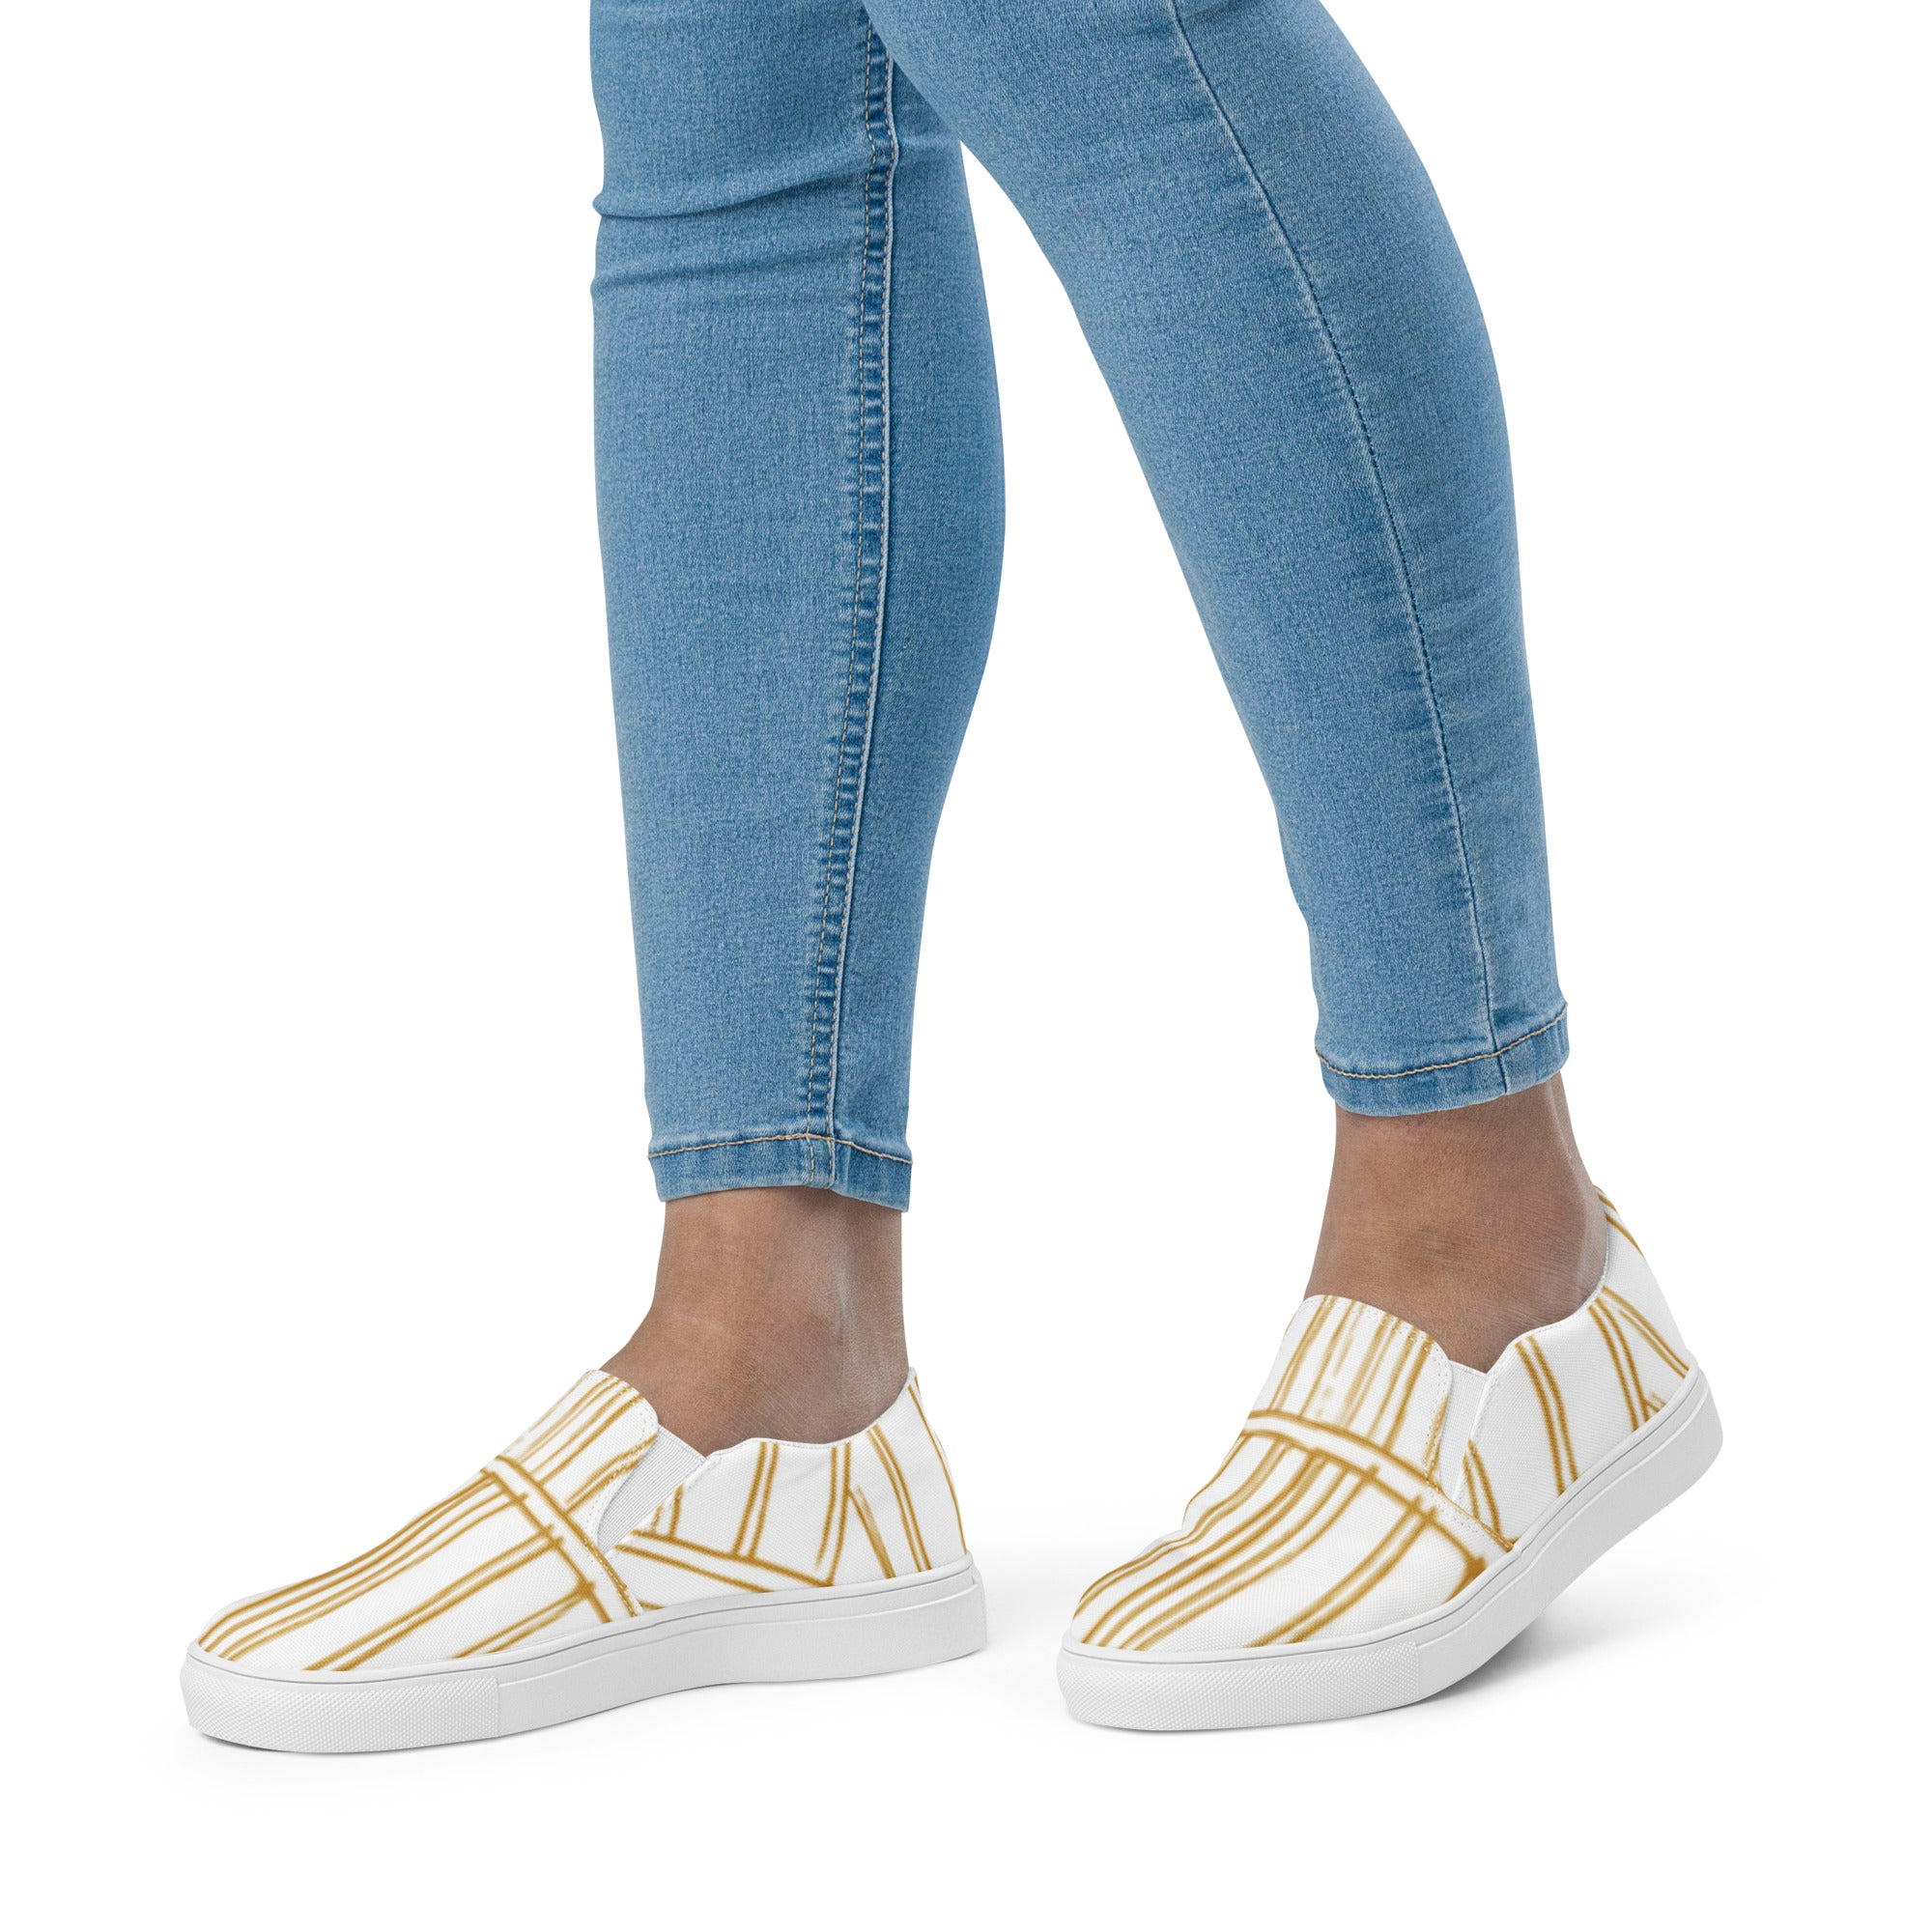 White and Gold slip-on shoes